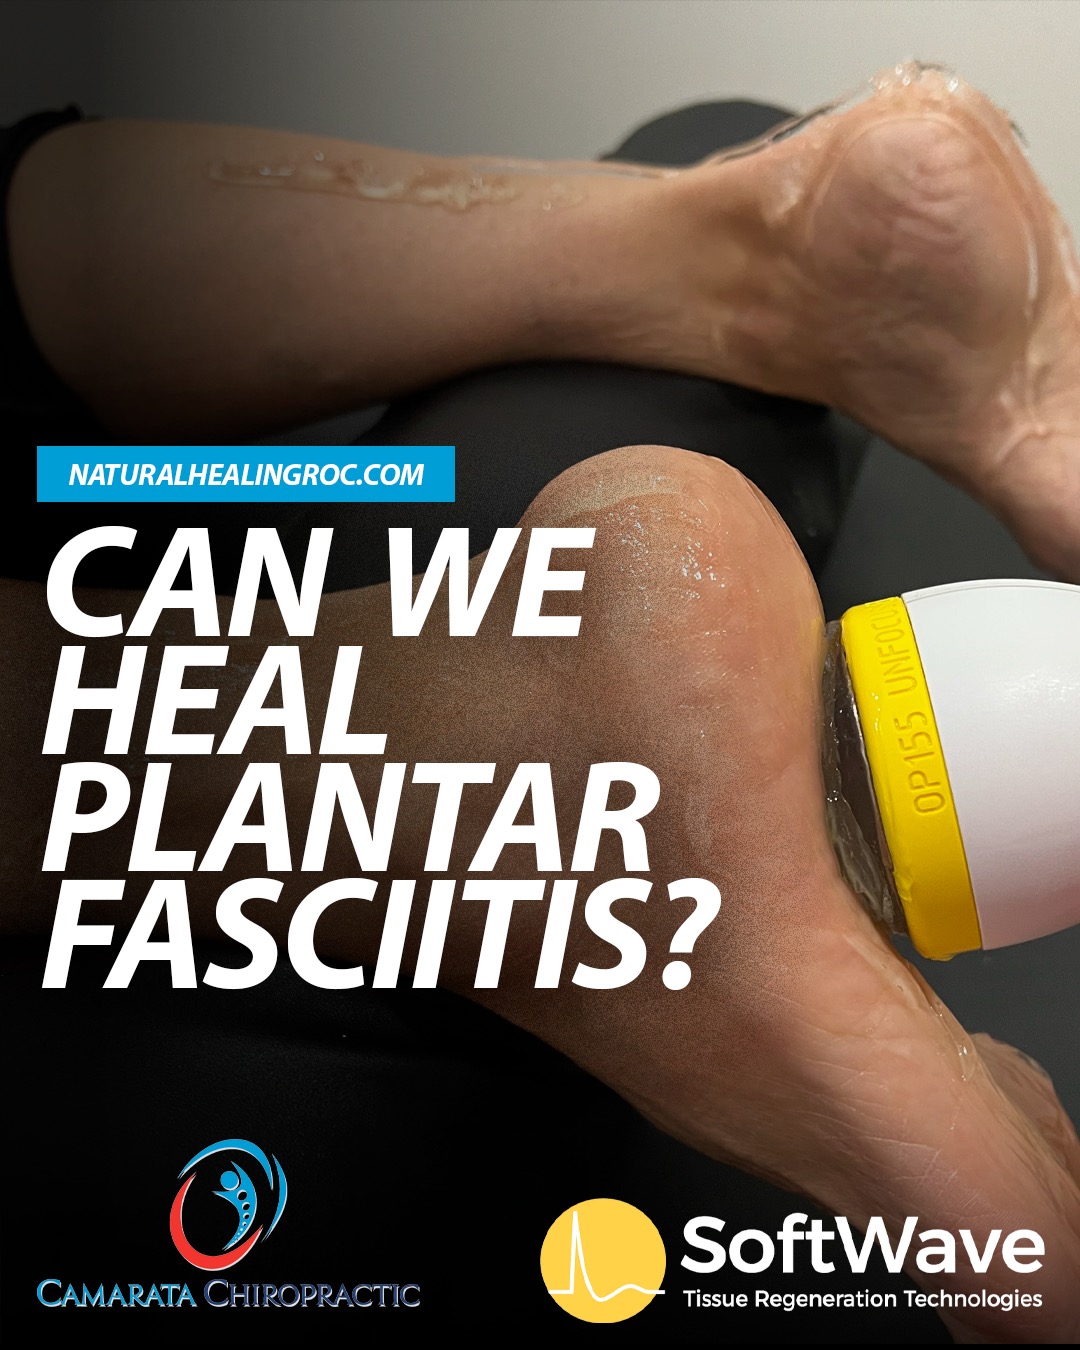 Healing Plantar Fasciitis with SoftWave Therapy at Camarata Chiropractic & Wellness